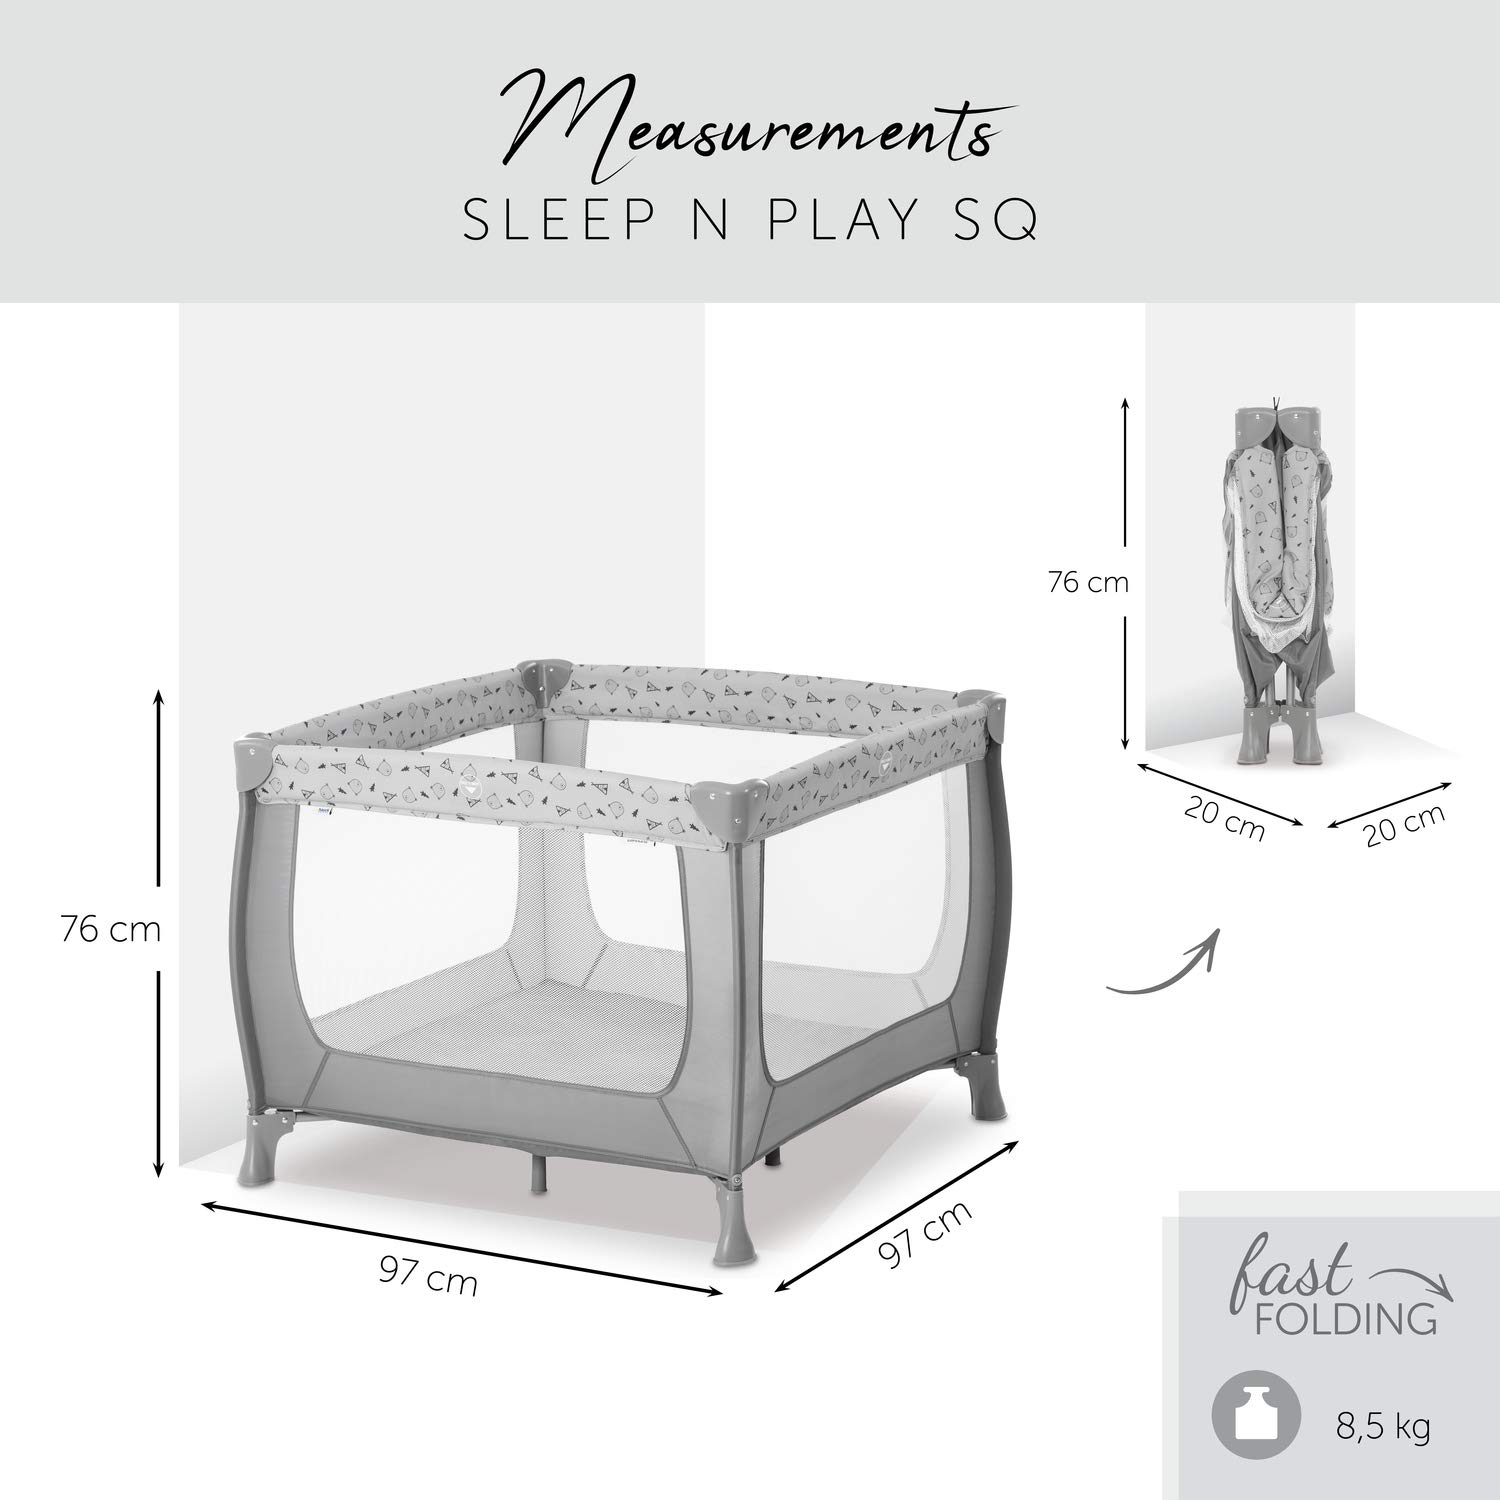 Hauck Sleep N Play SQ Playpen / Travel Cot for Babies and Children / from Birth up to 15 kg / Square 90 x 90 cm / Compact Foldable / Includes Carry Bag / Nordic Grey